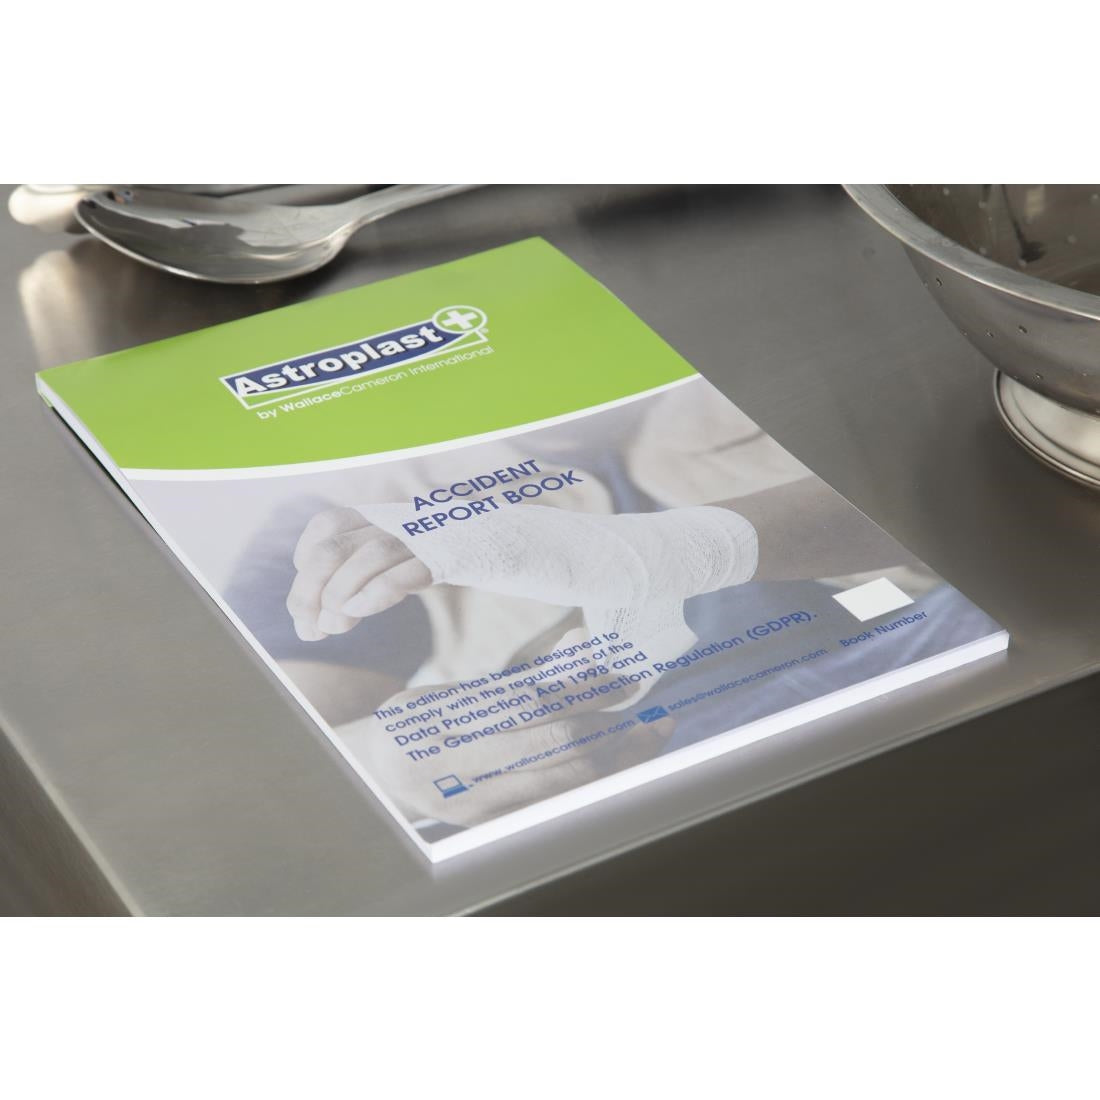 1G0005 Accident Report Book A4 JD Catering Equipment Solutions Ltd